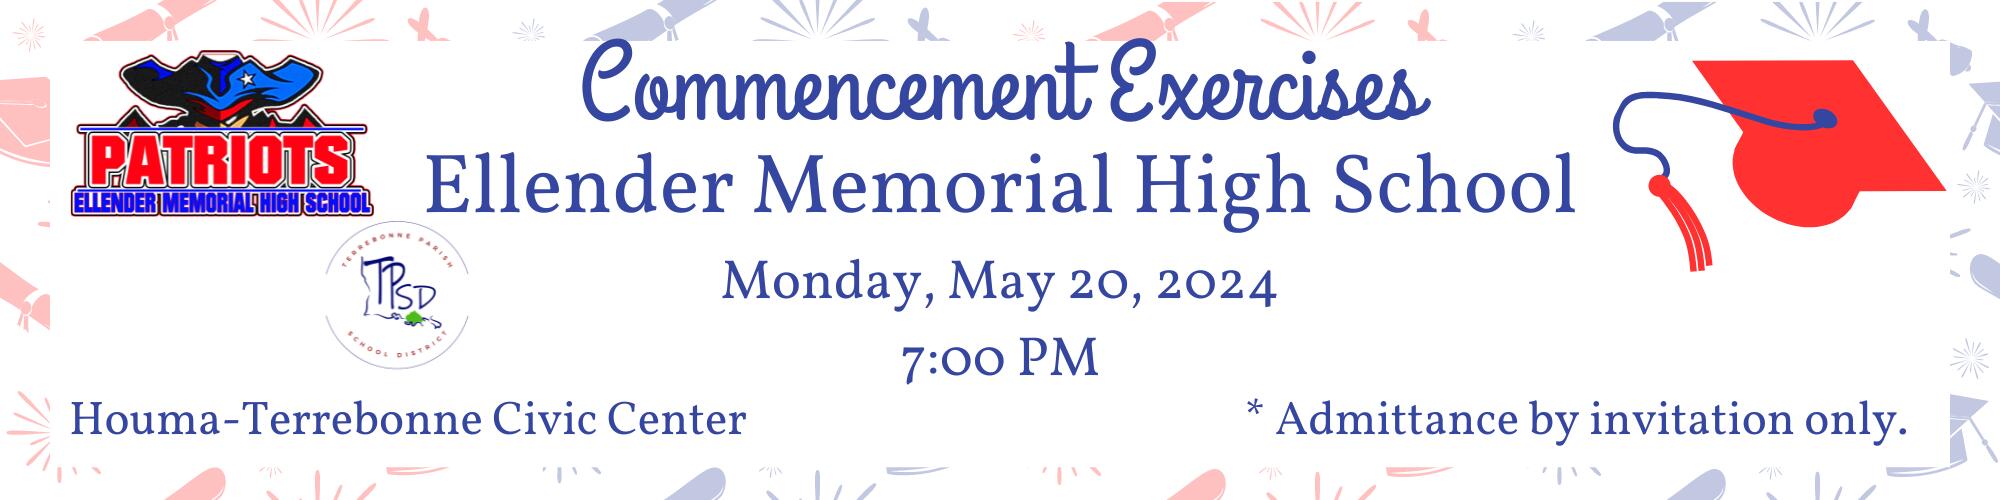 EMHS Commencement Exercises